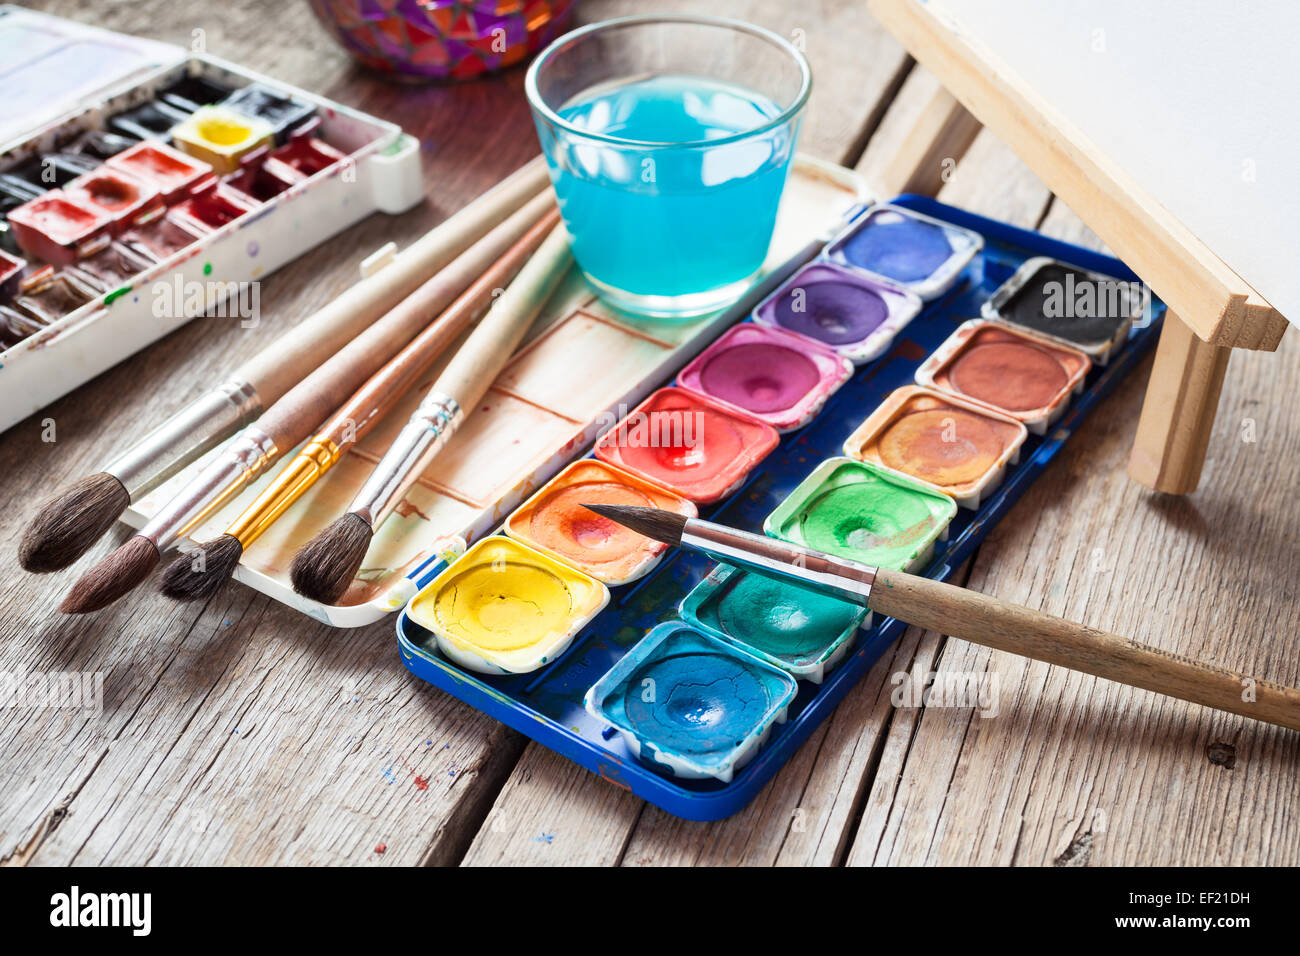 https://c8.alamy.com/comp/EF21DH/box-of-watercolor-paints-art-brushes-glass-of-water-and-easel-with-EF21DH.jpg